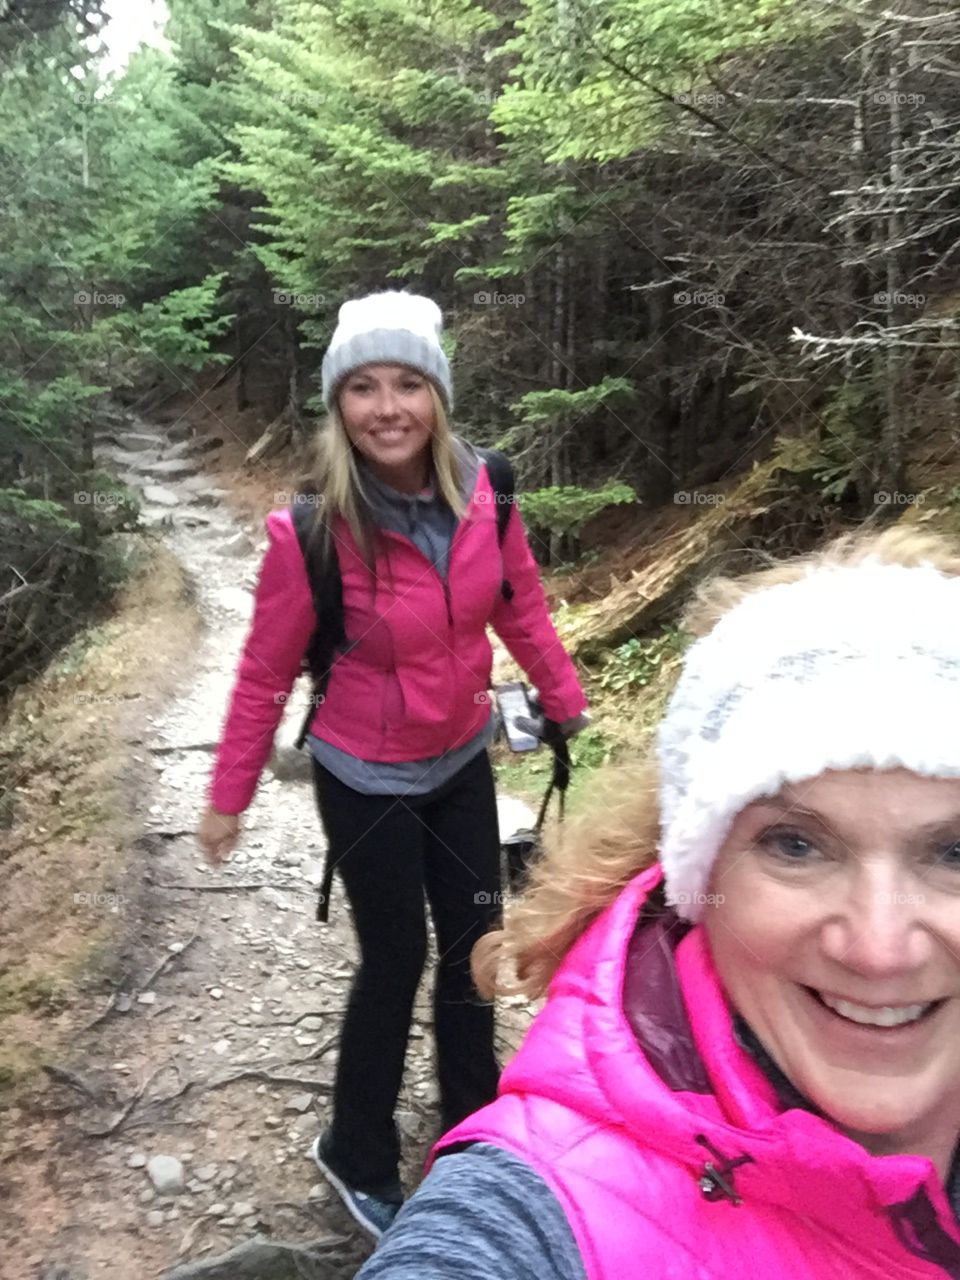 Hiking with mom in the smokies!